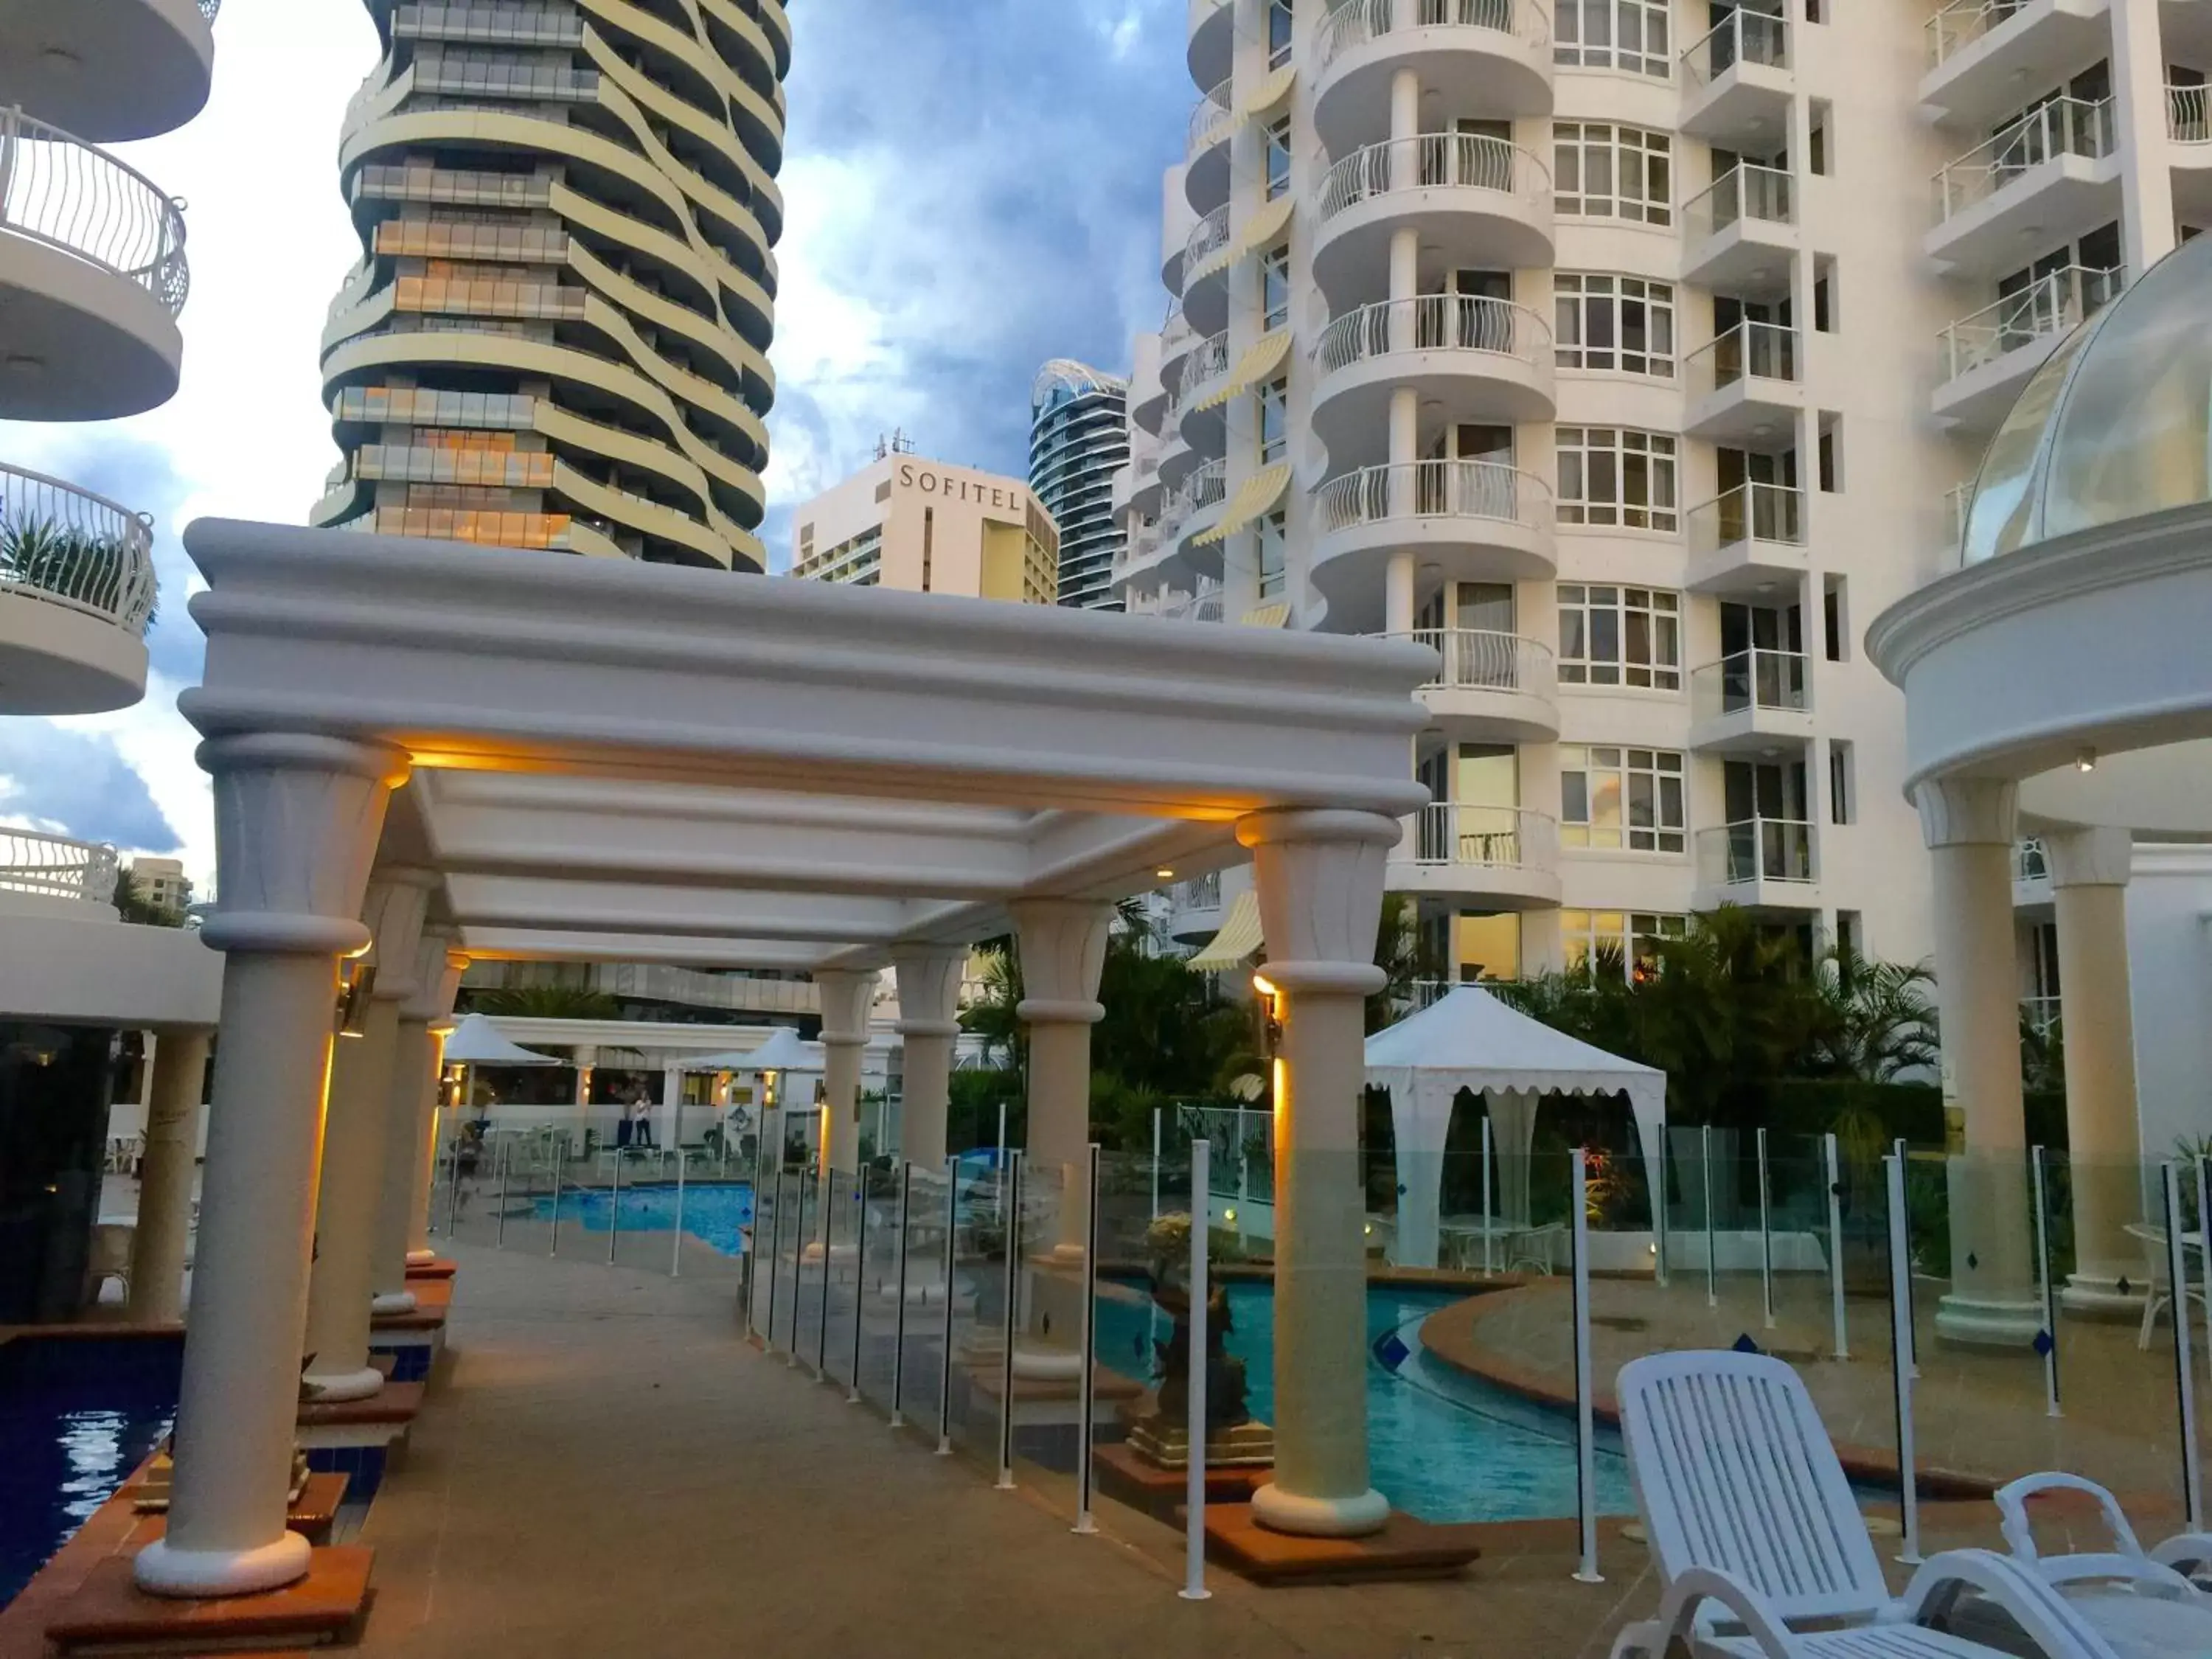 Swimming pool in Broadbeach Holiday Apartments